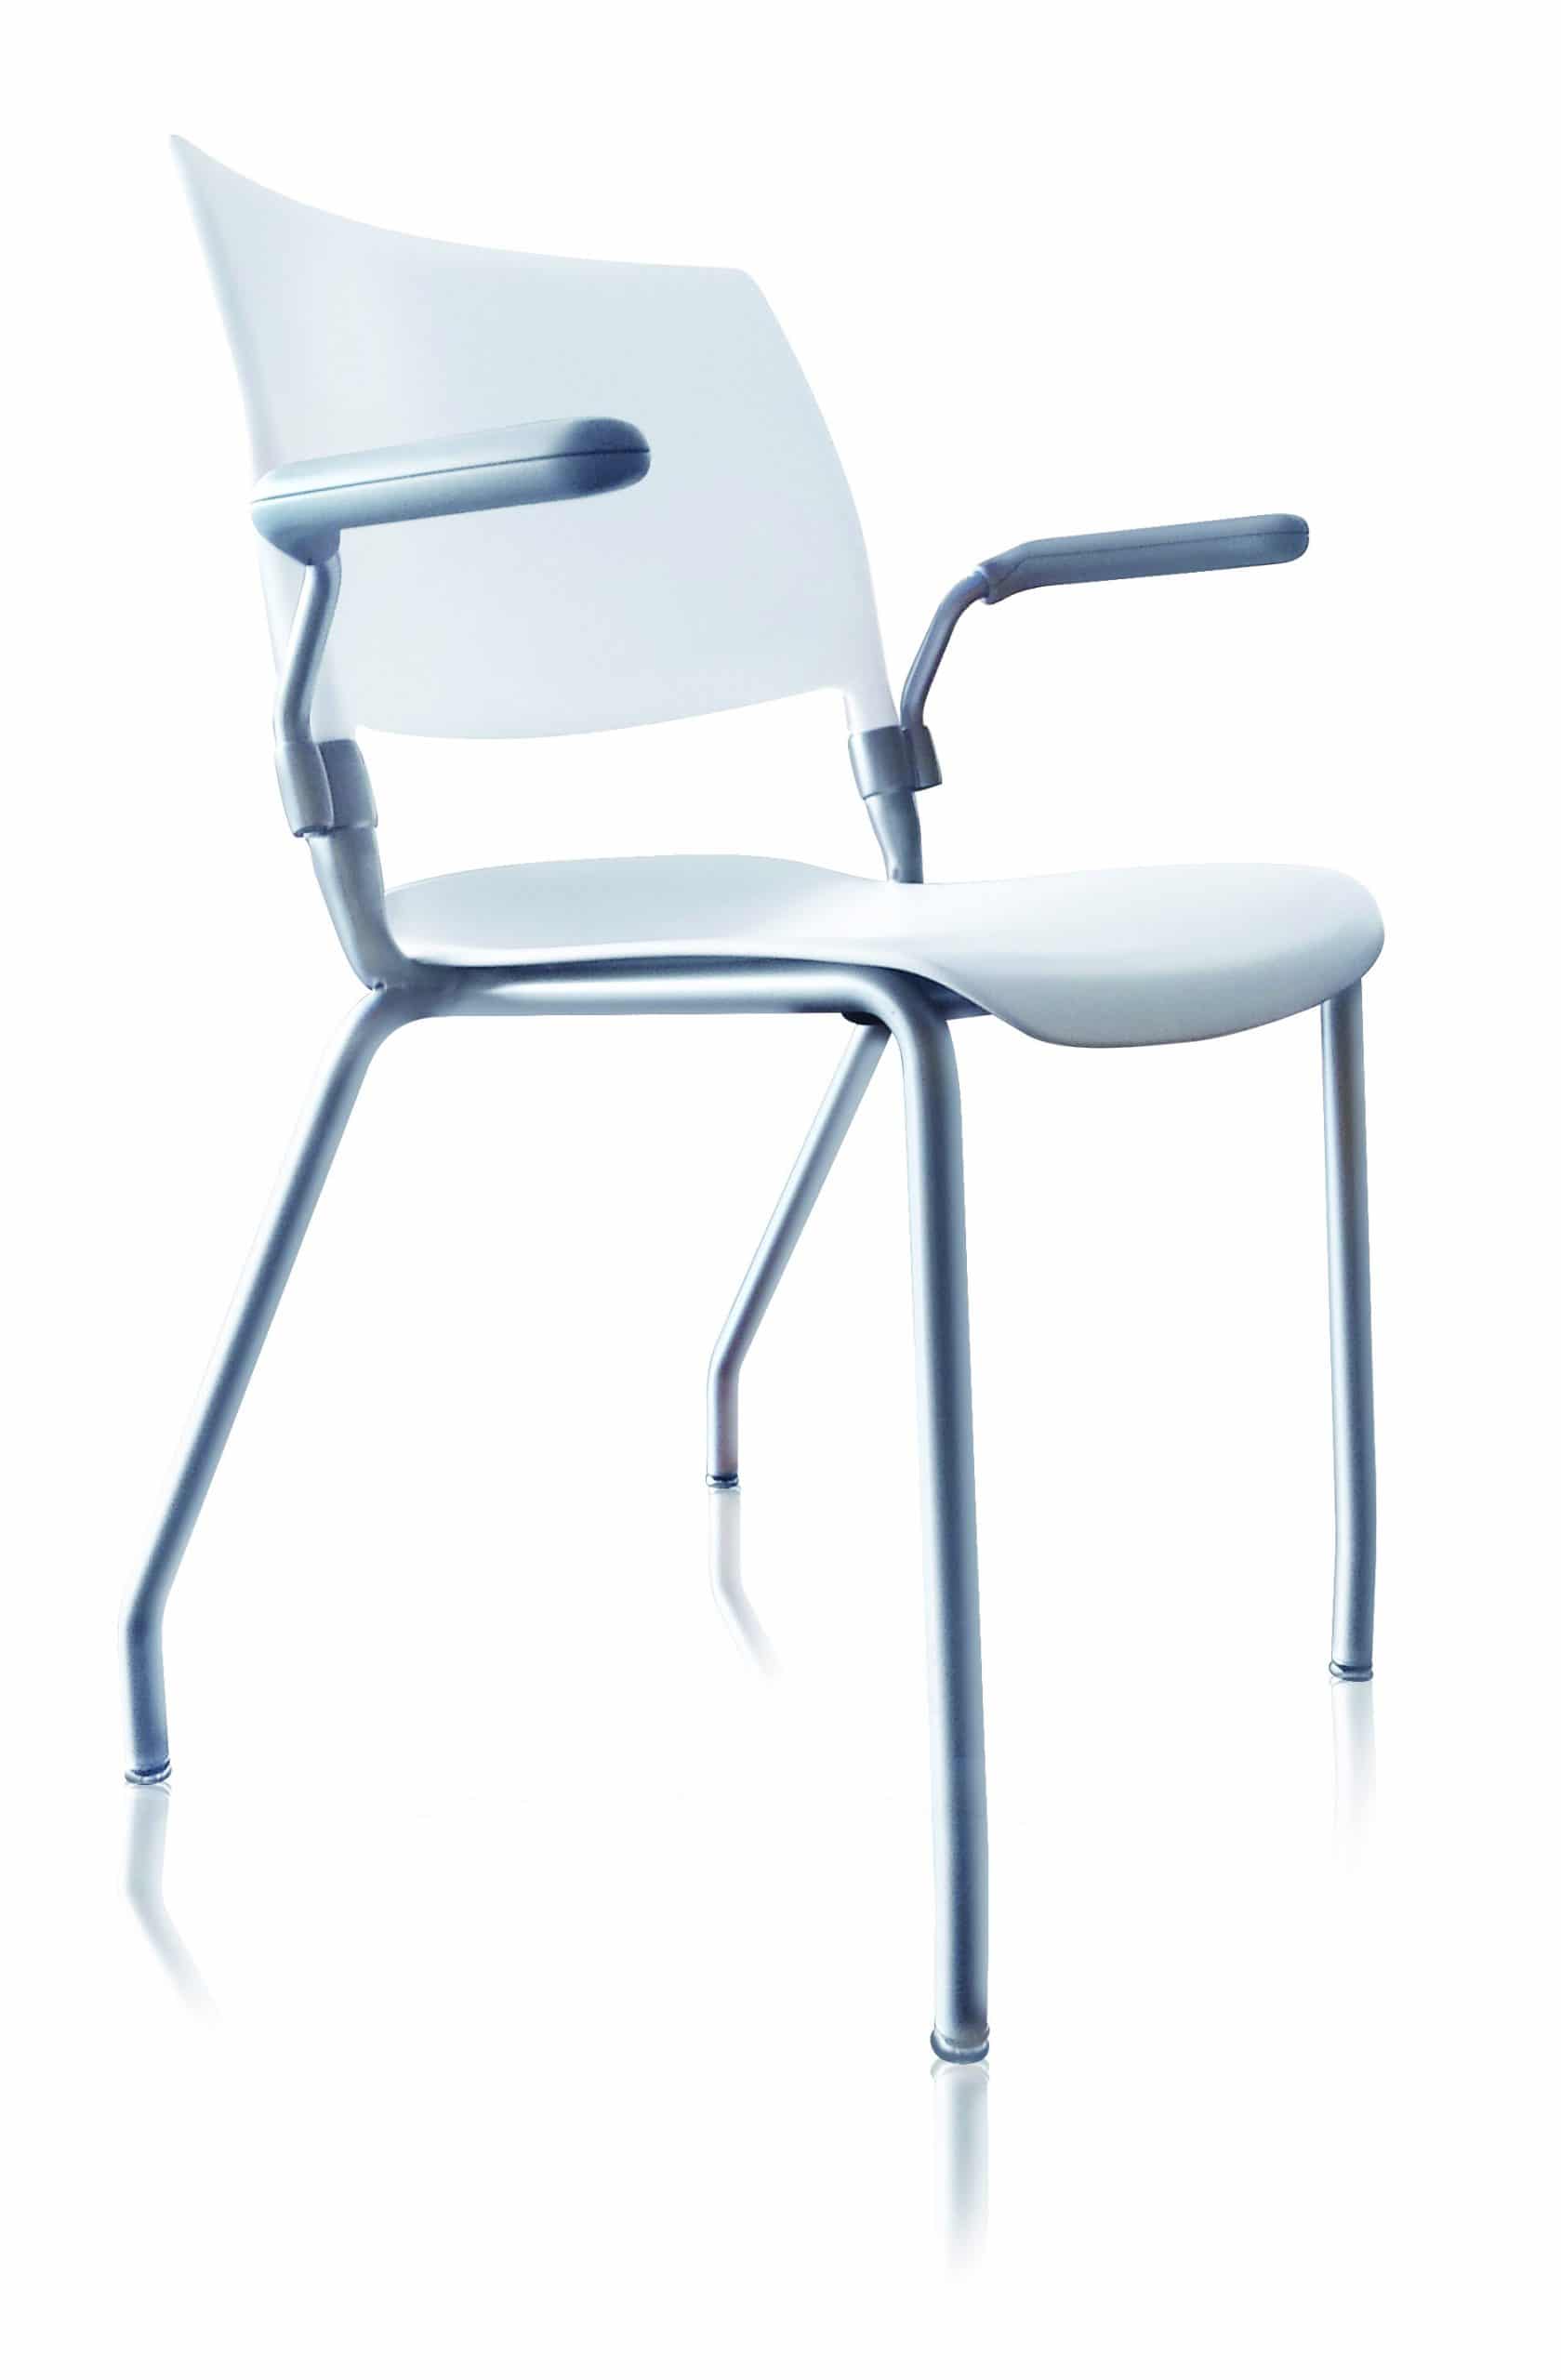 NIMA chair from PS Furniture